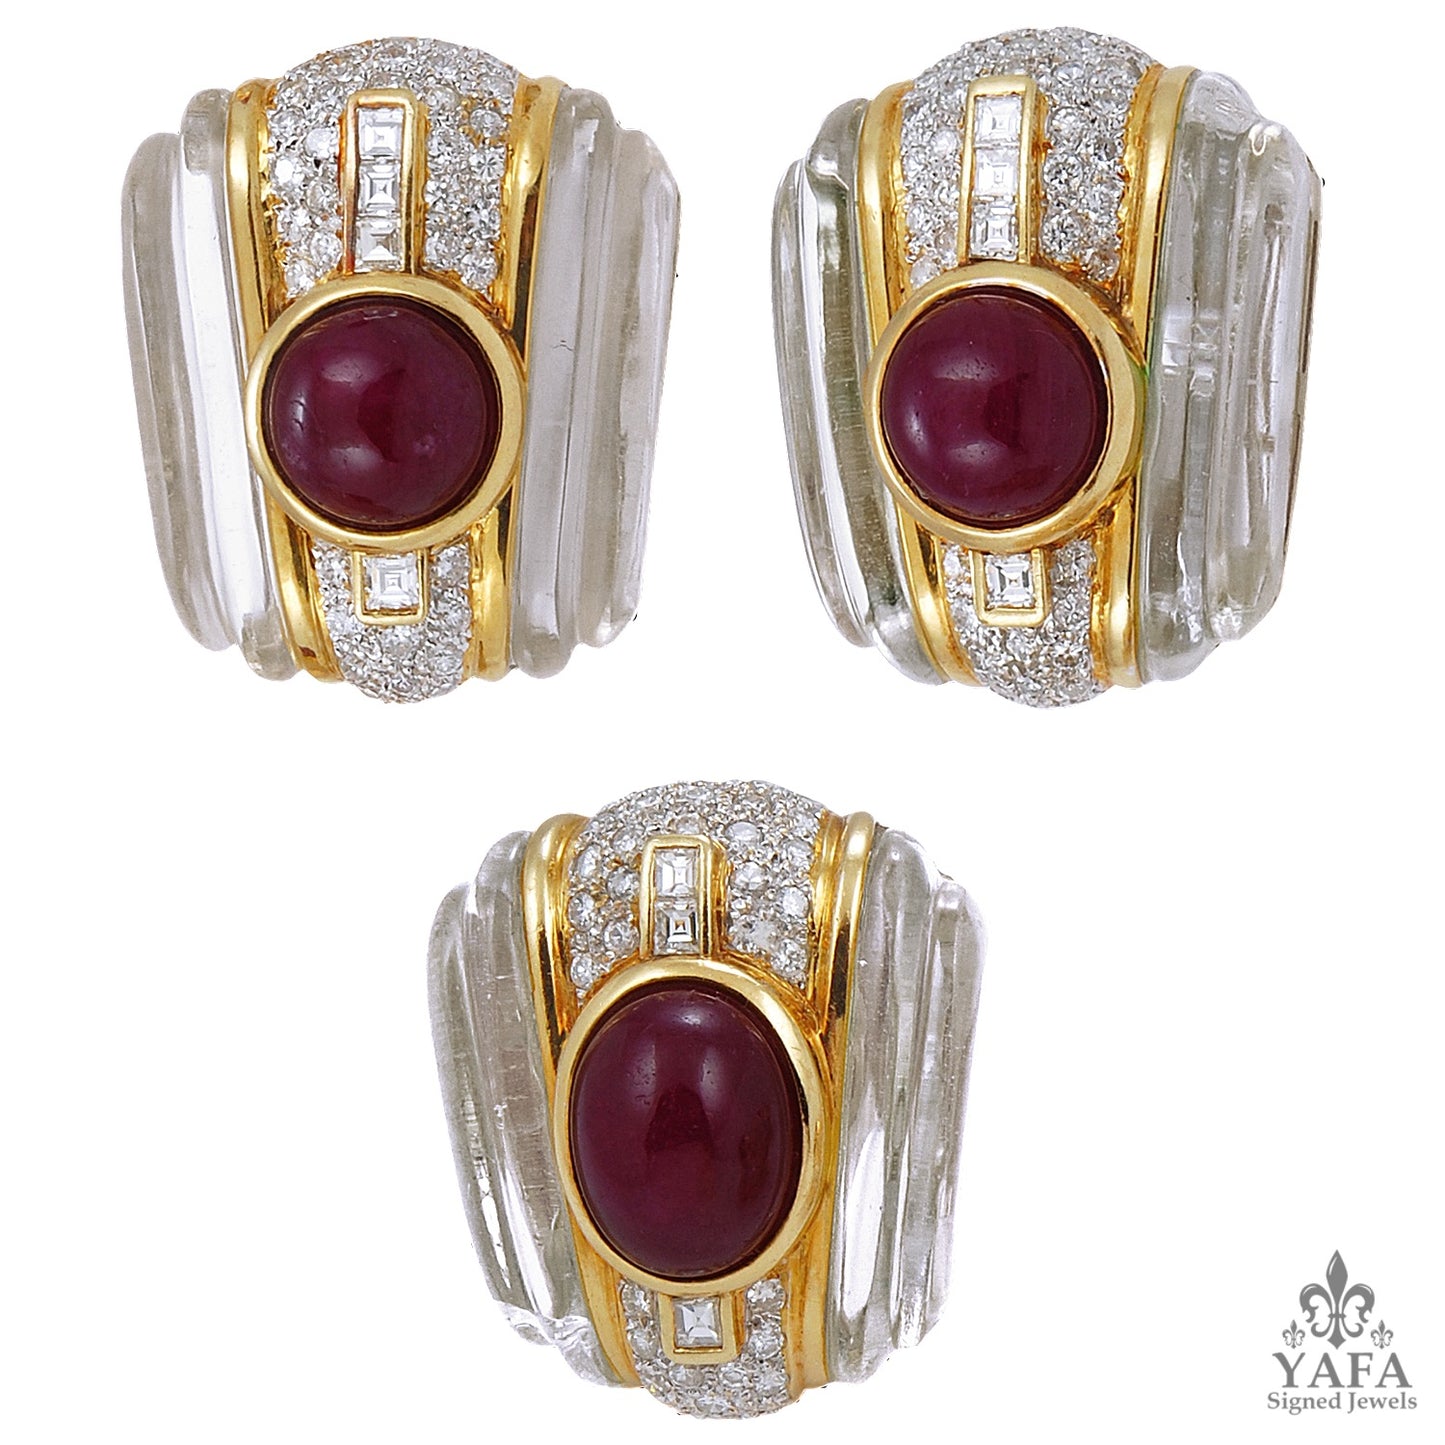 18k Gold Crystal, Cabochon Ruby & Diamond Earrings Suite